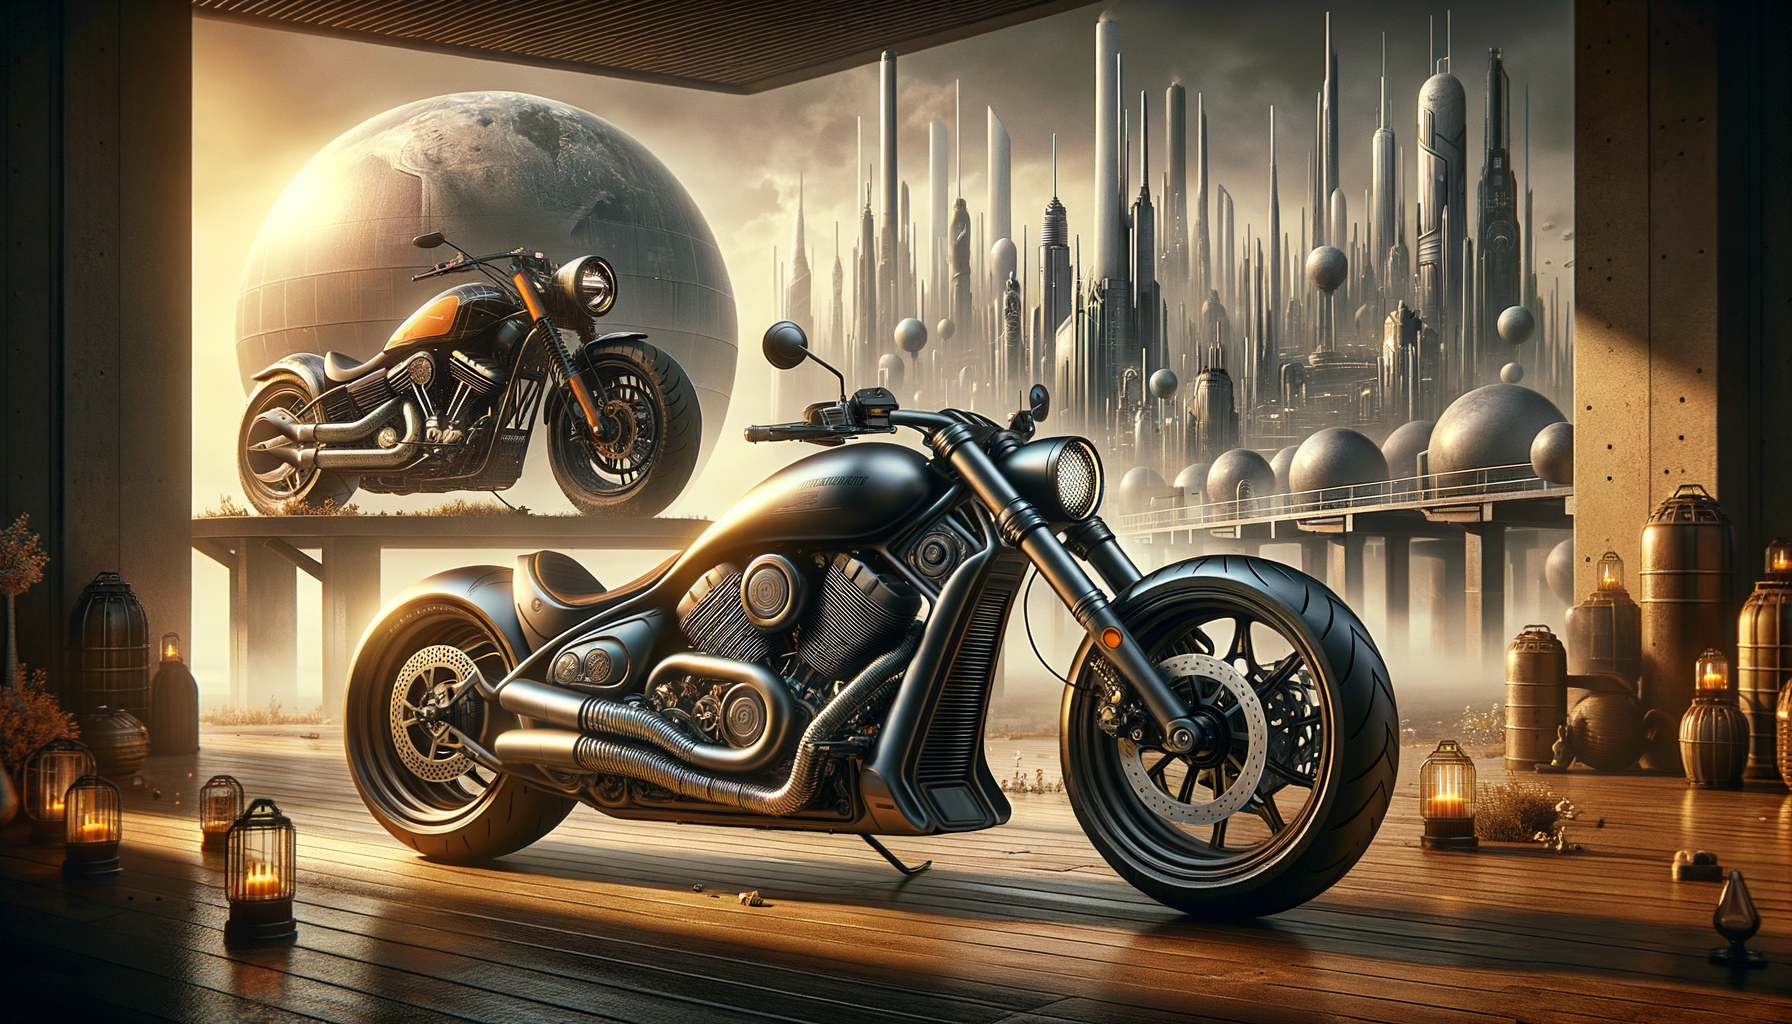 discover if the 2024 harley-davidson street glide & road glide are the ultimate dream bikes of the future. find out now and explore the latest innovations!